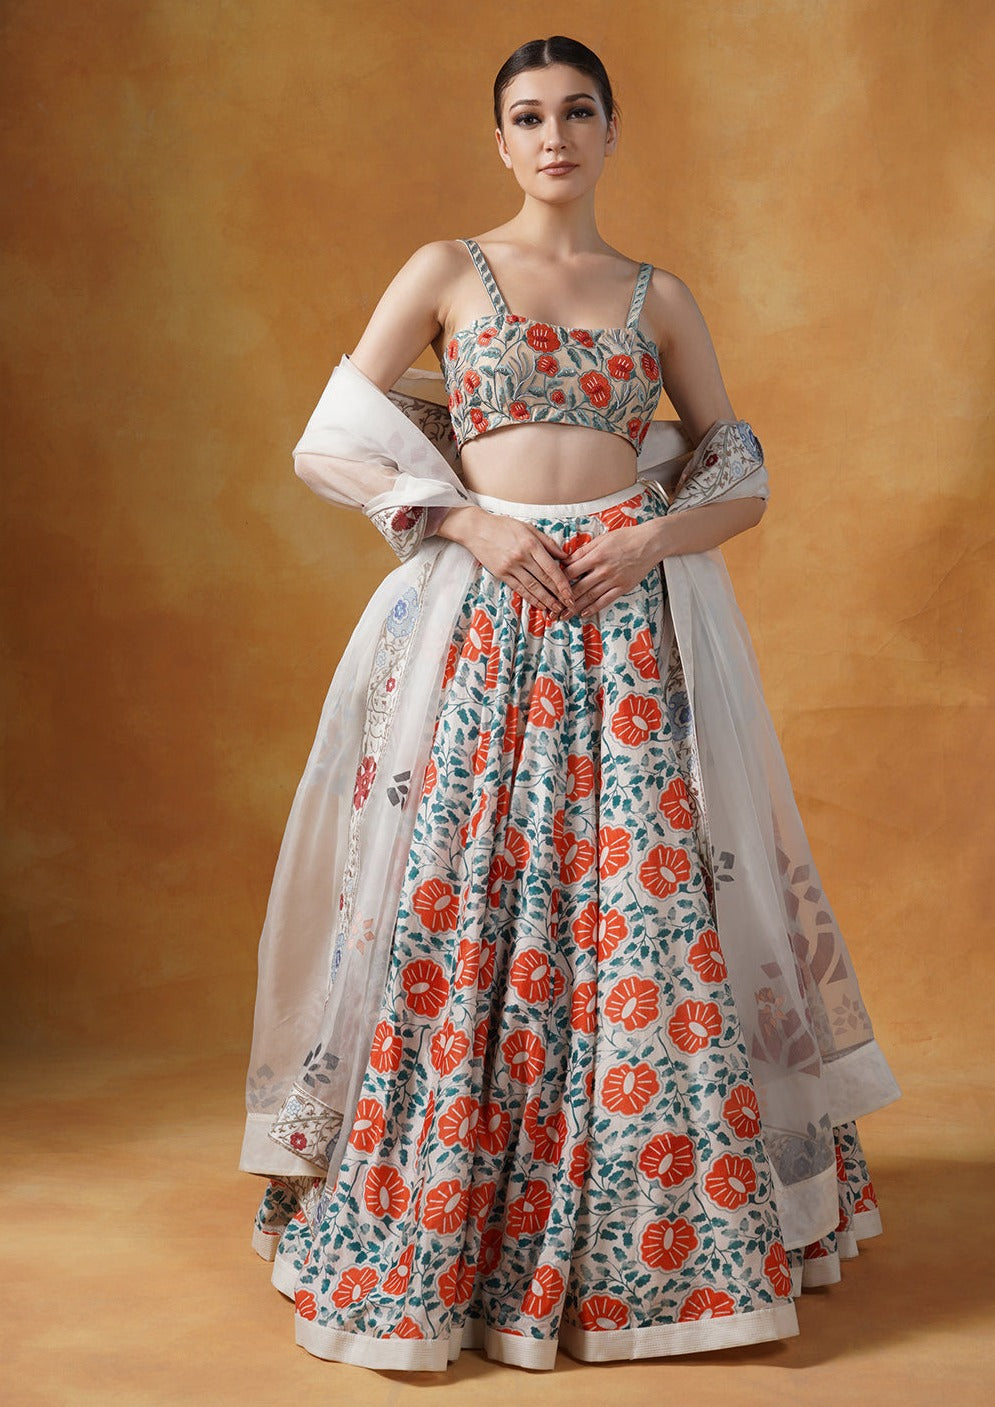 A printed lehenga set with intricately embroidered blouse and organza Dupatta